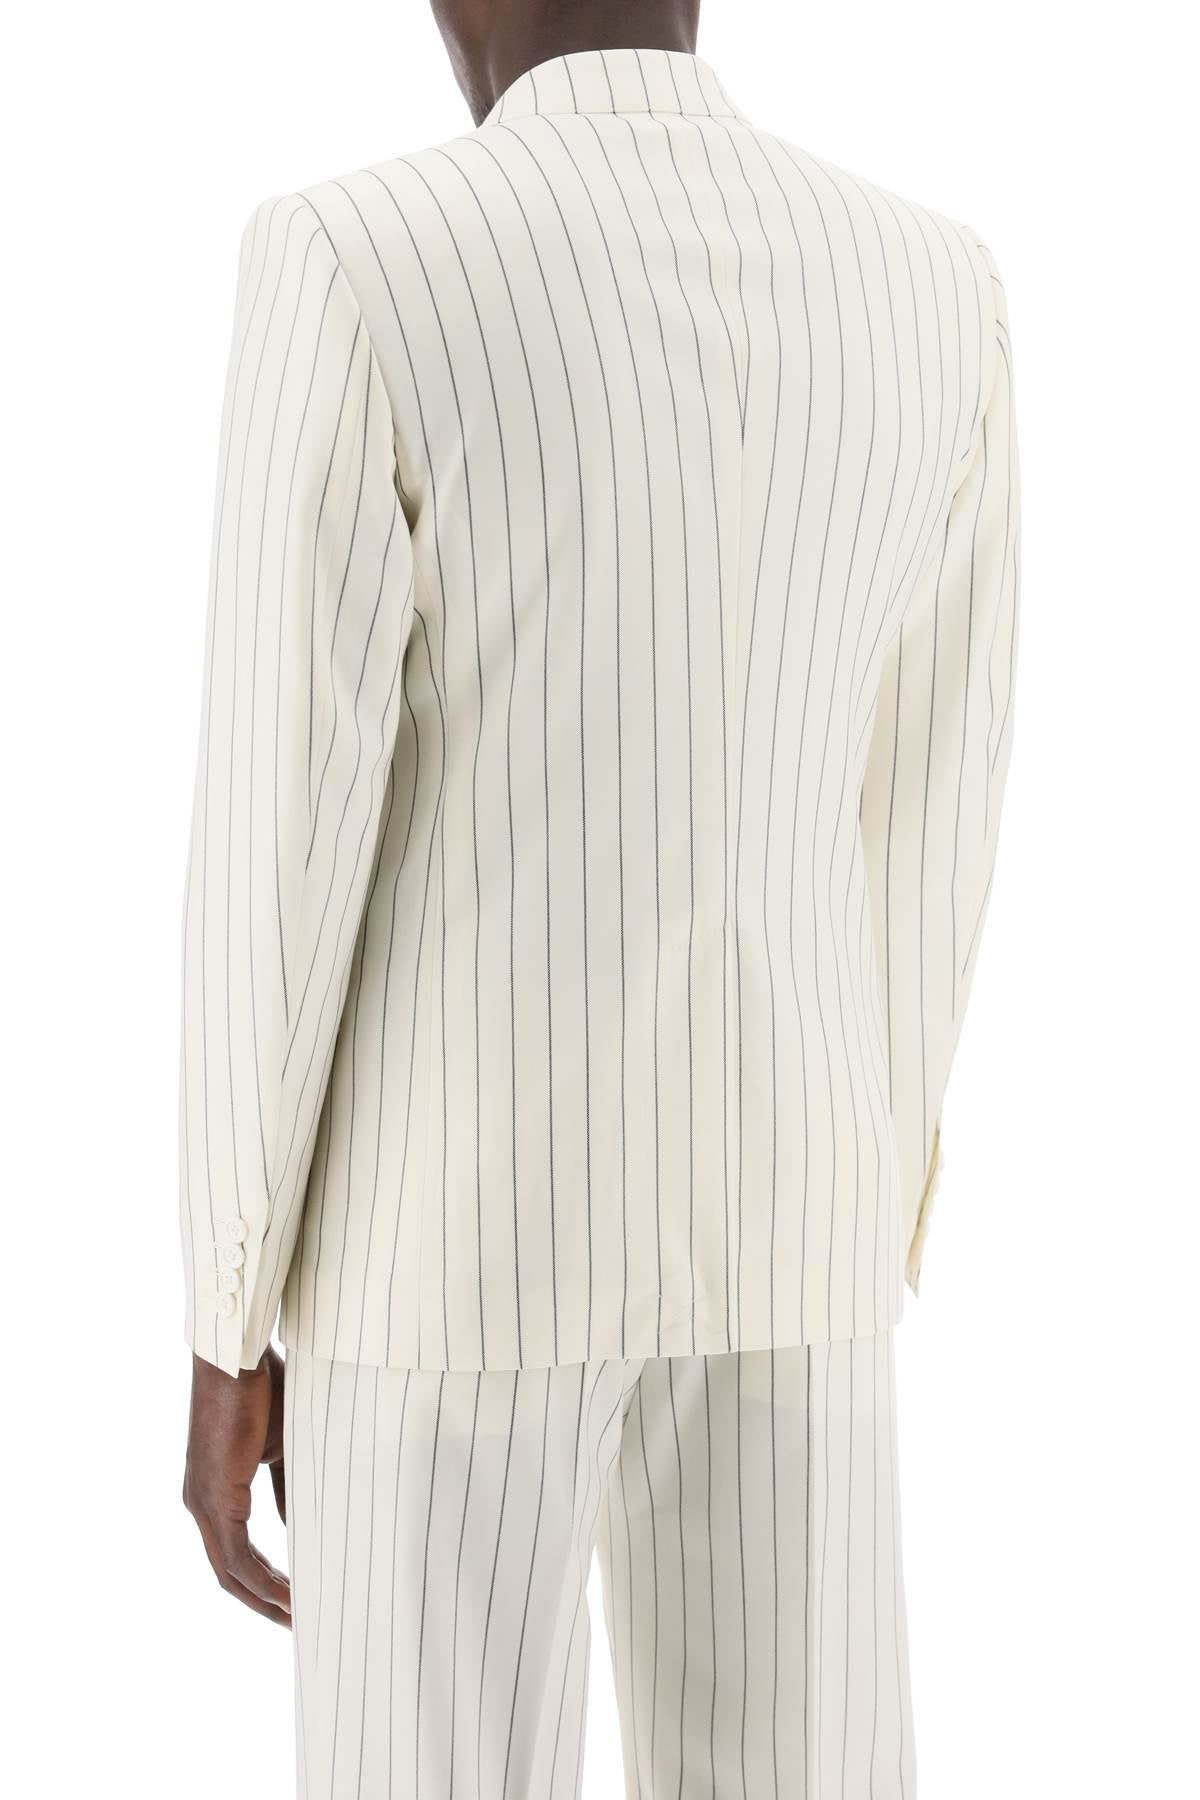 Dolce & gabbana double-breasted pinstripe-2